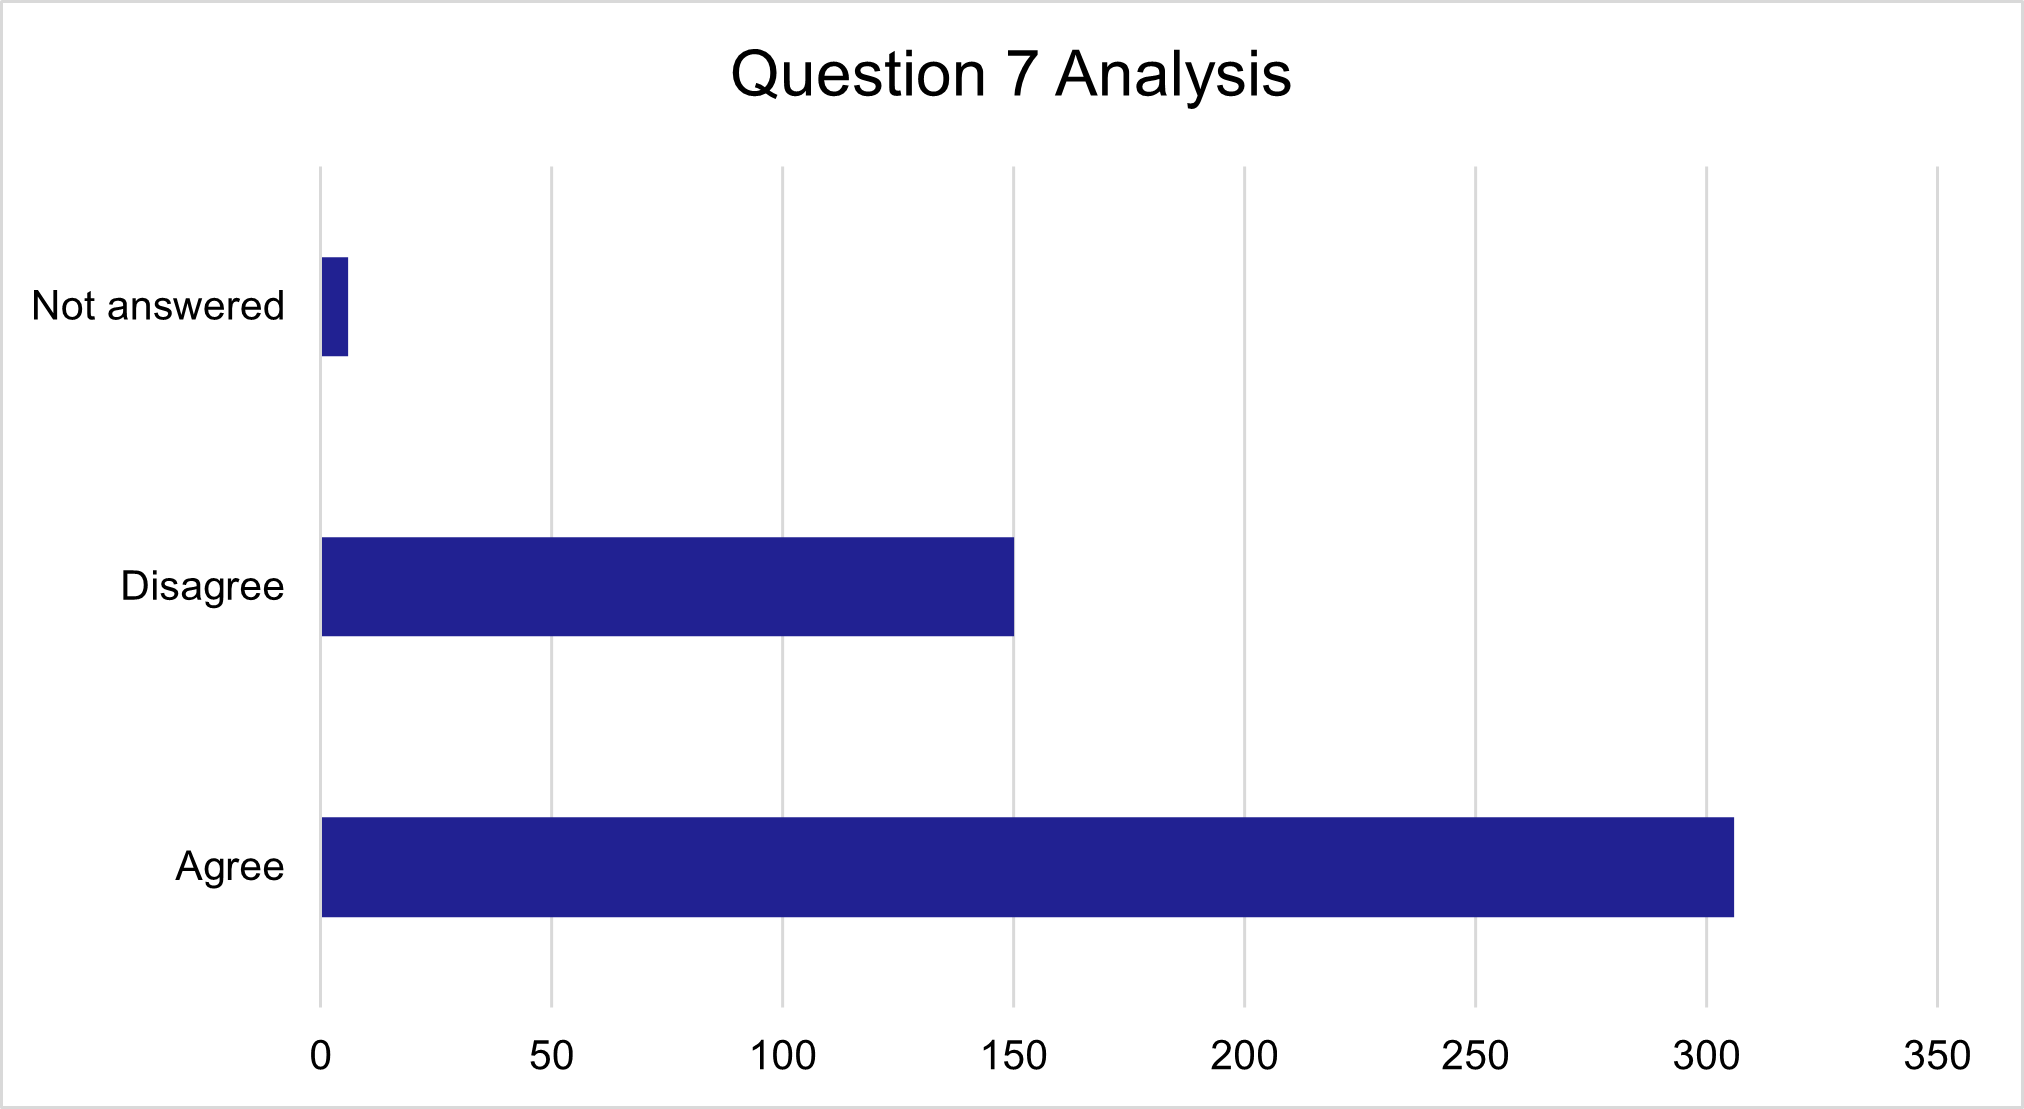 Question 7 responses, as described in text